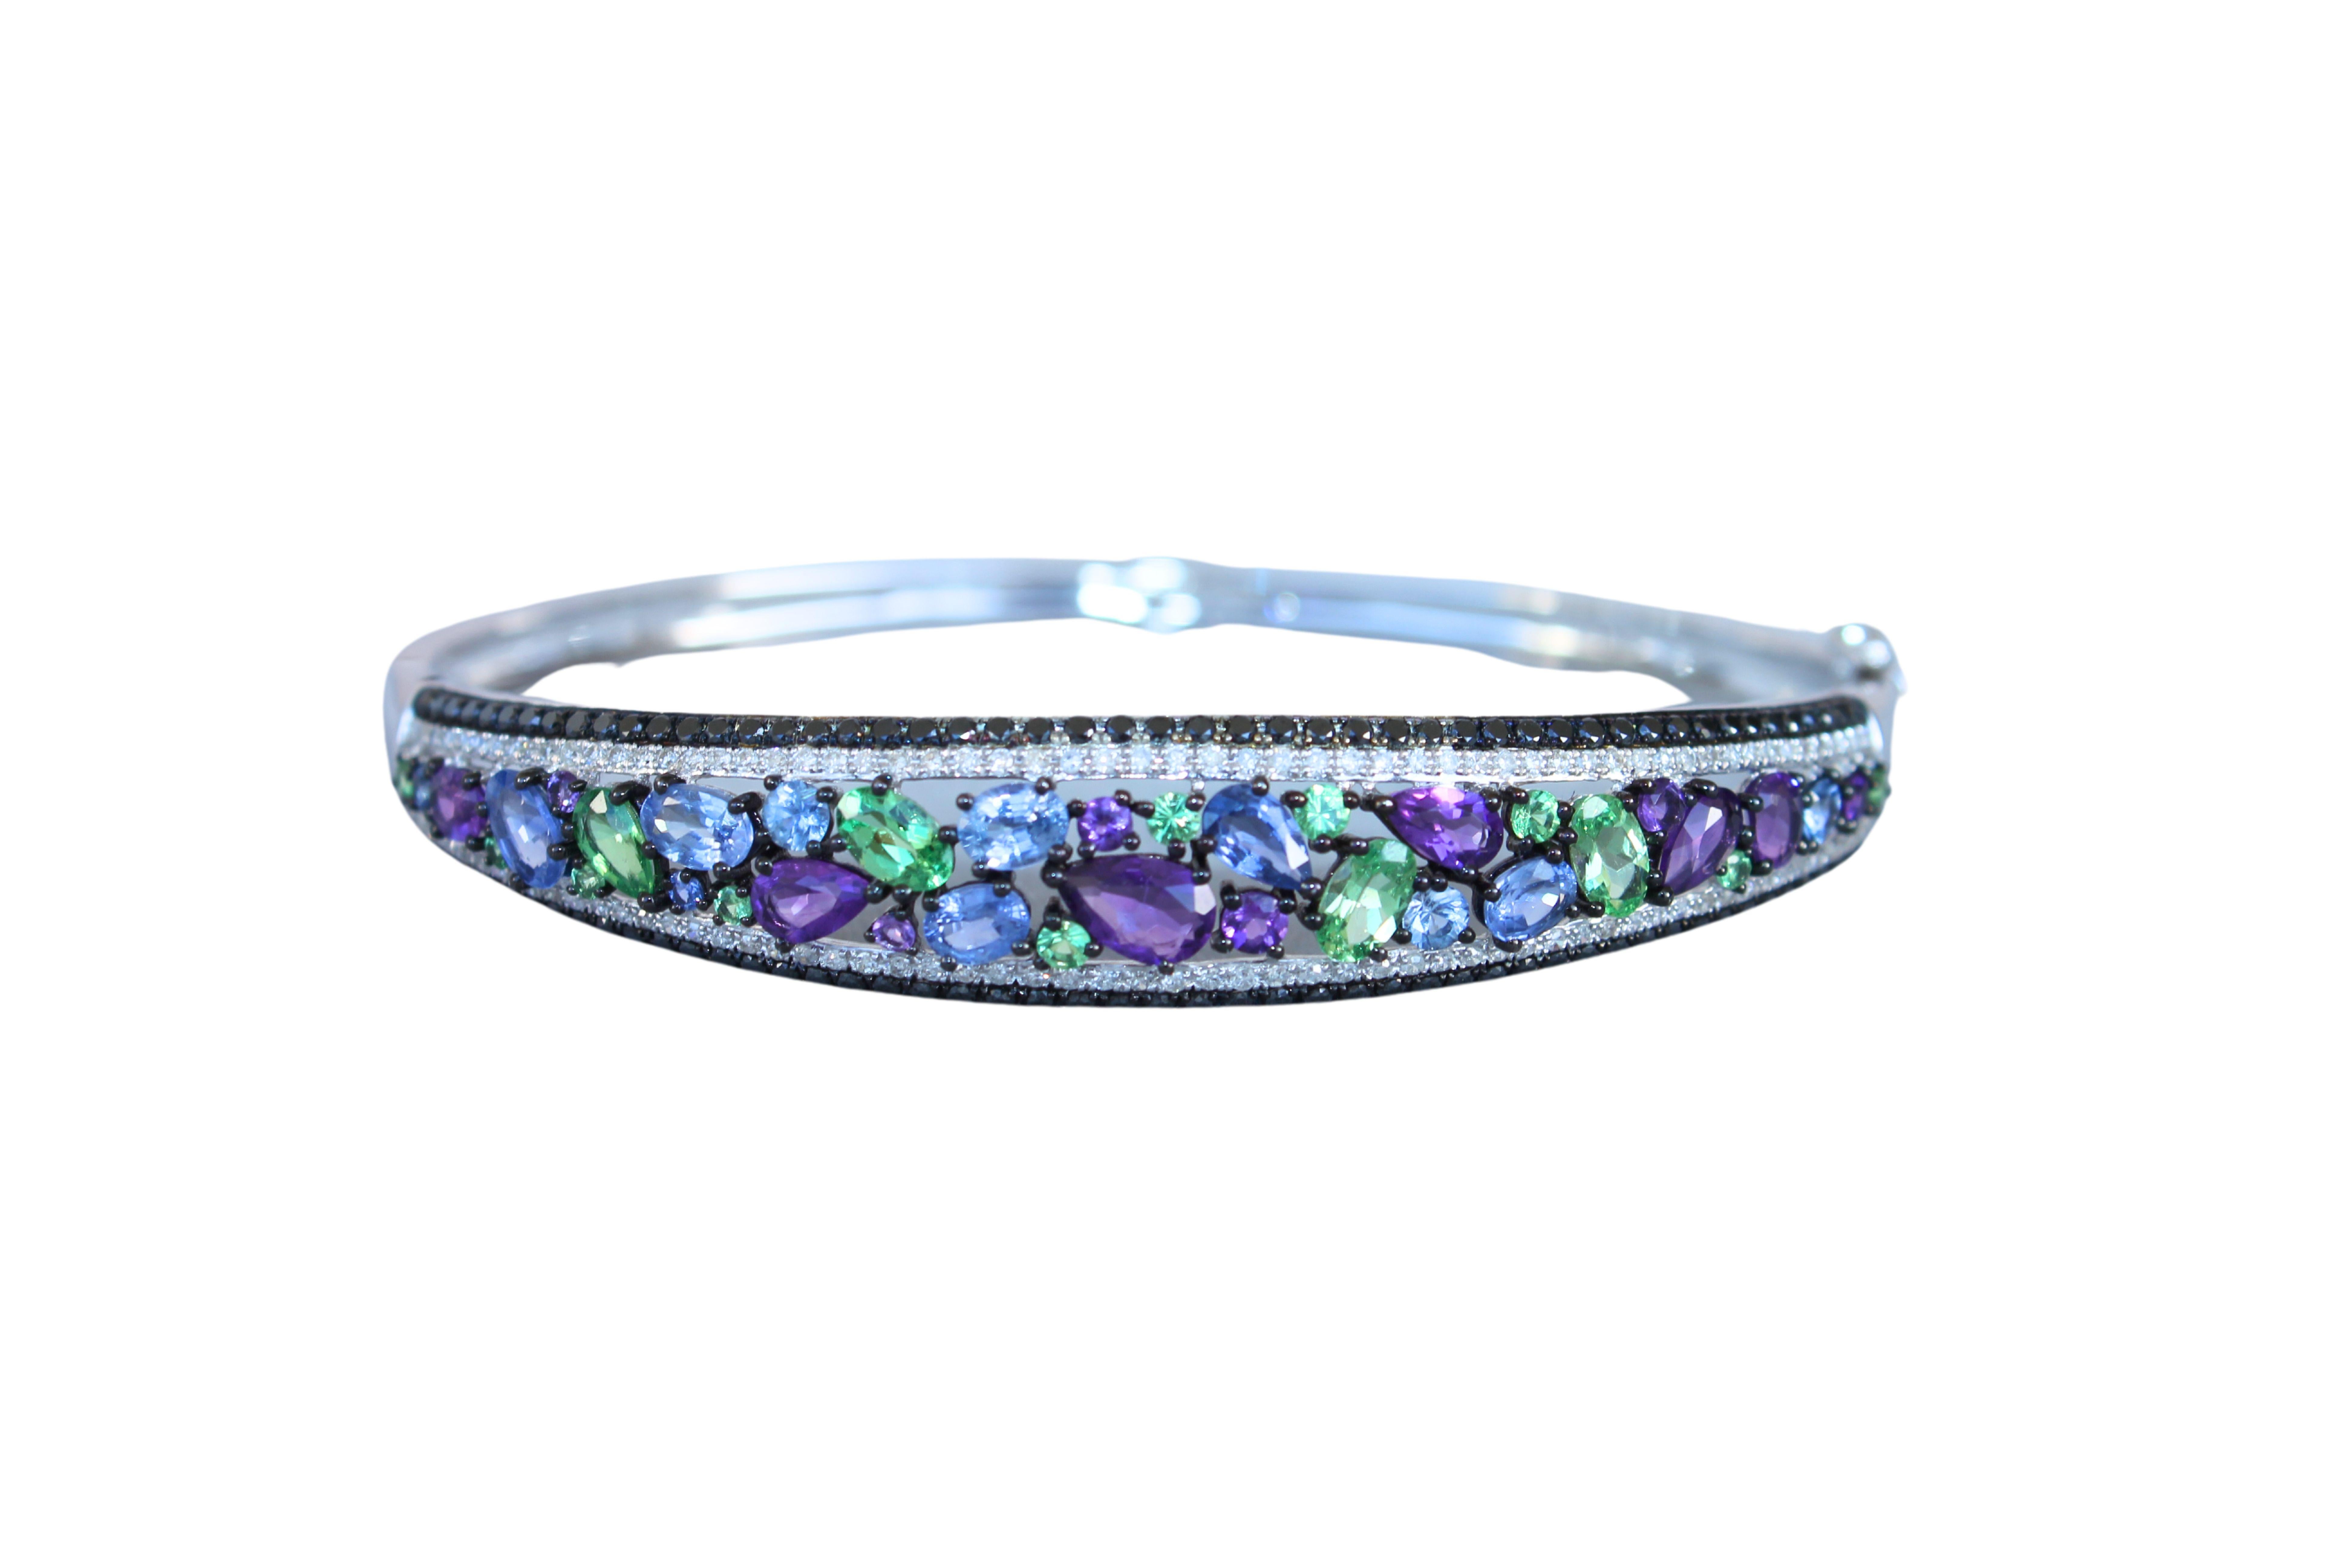 Multi Fancy Shape Multi Color Gemstones (Sapphires, Amethysts, Tsavorites)
5.07 CTW
Round Diamond 1.2 CTW of white & black diamonds
14K White Gold
60 x 50 mm length width ratio of inner dimensions
Will fit most small and medium-size wrists
